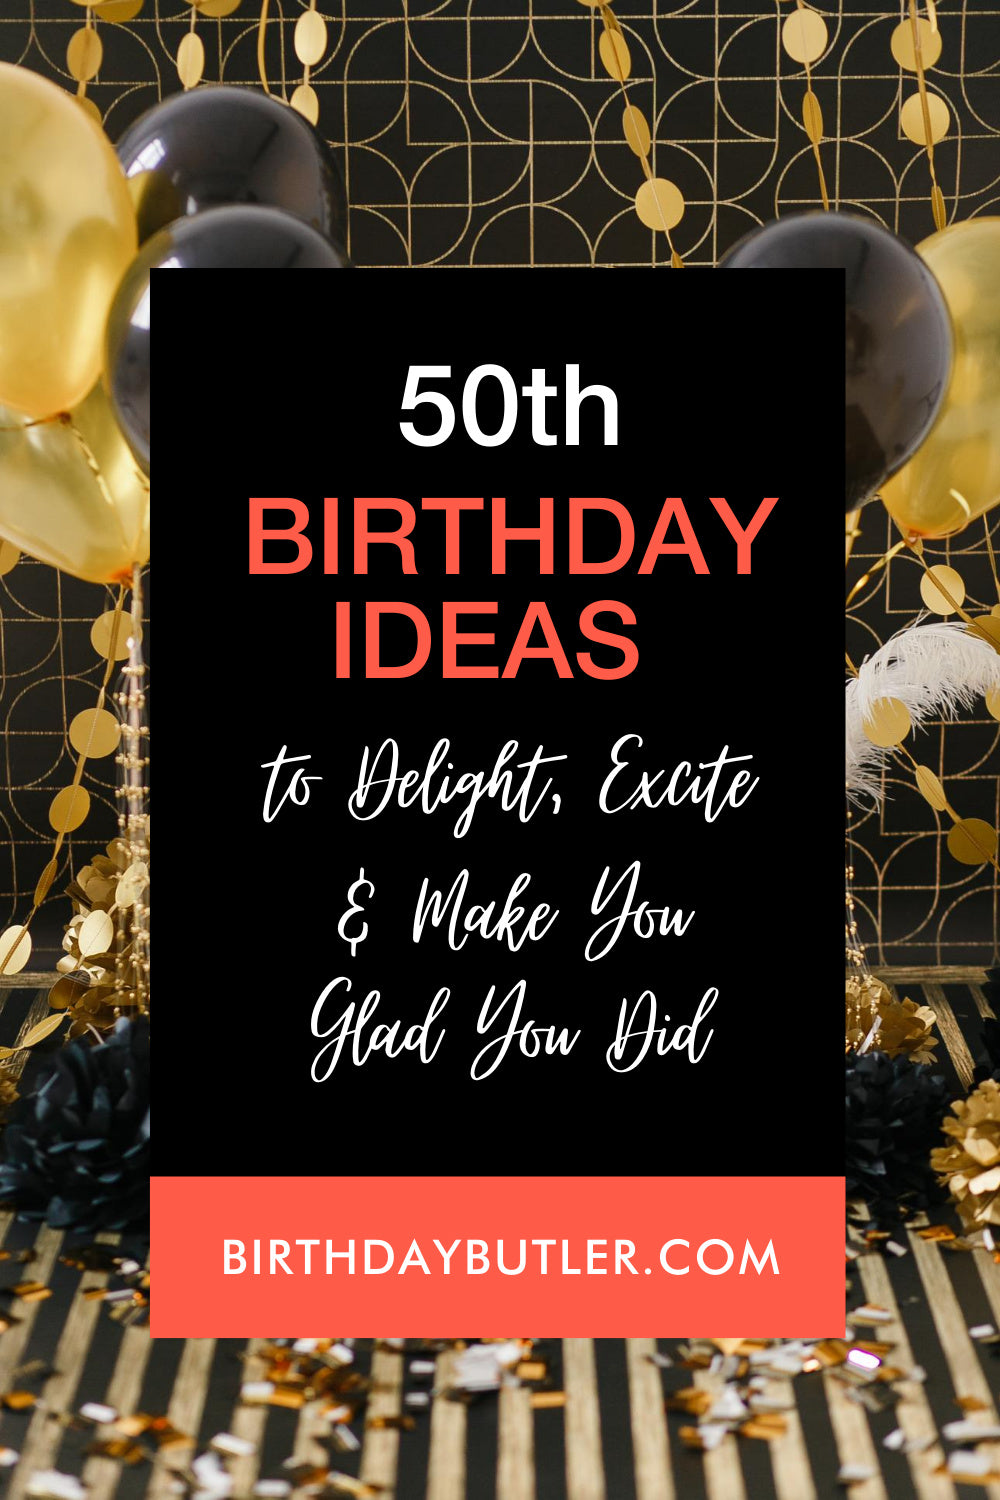 50th-birthday-ideas-to-delight-excite-and-make-you-glad-did-birthday